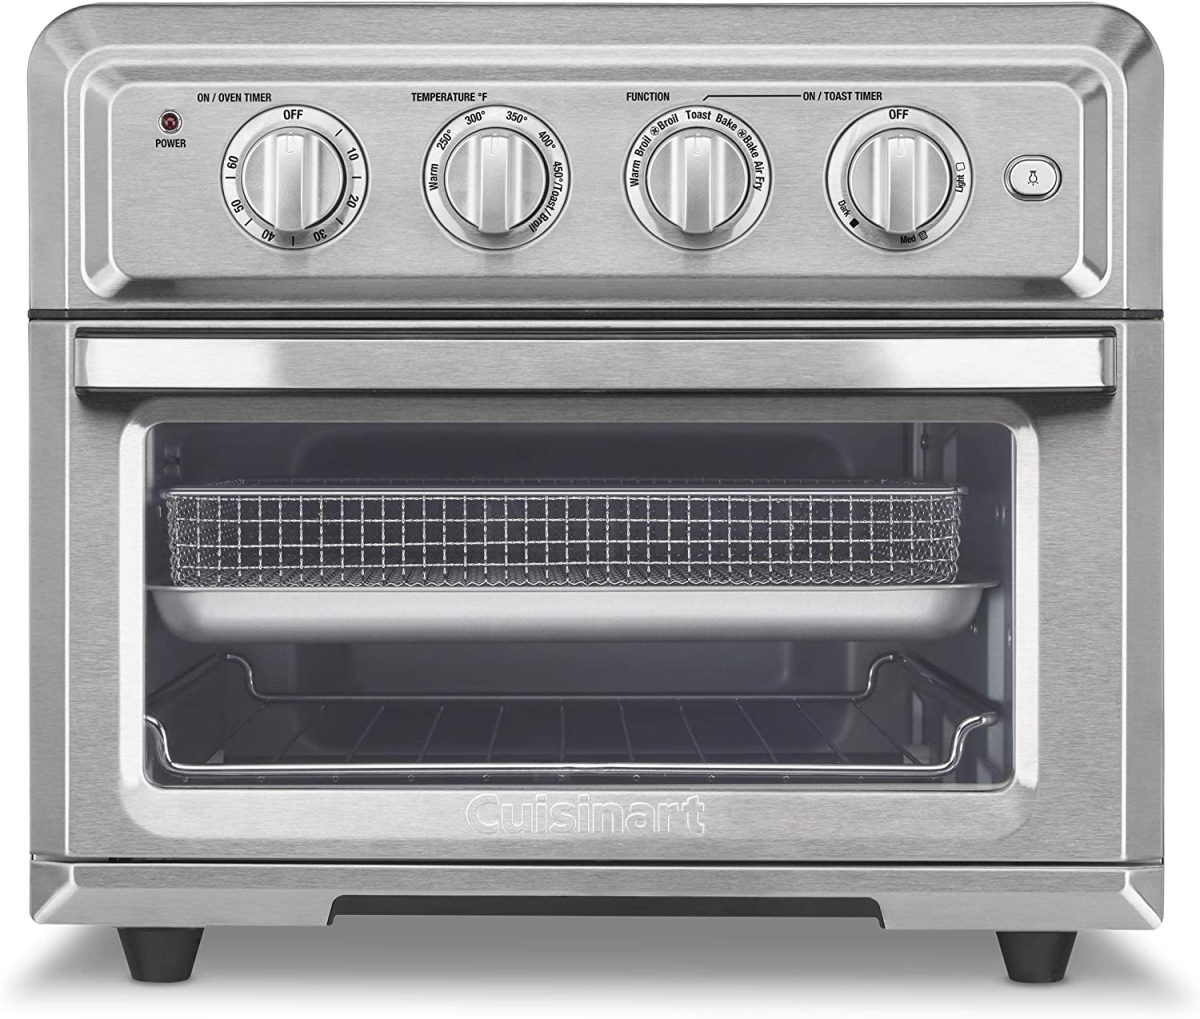 Cuisinart Air Fryer Toaster Oven Review: Is it Worth It? - Tested